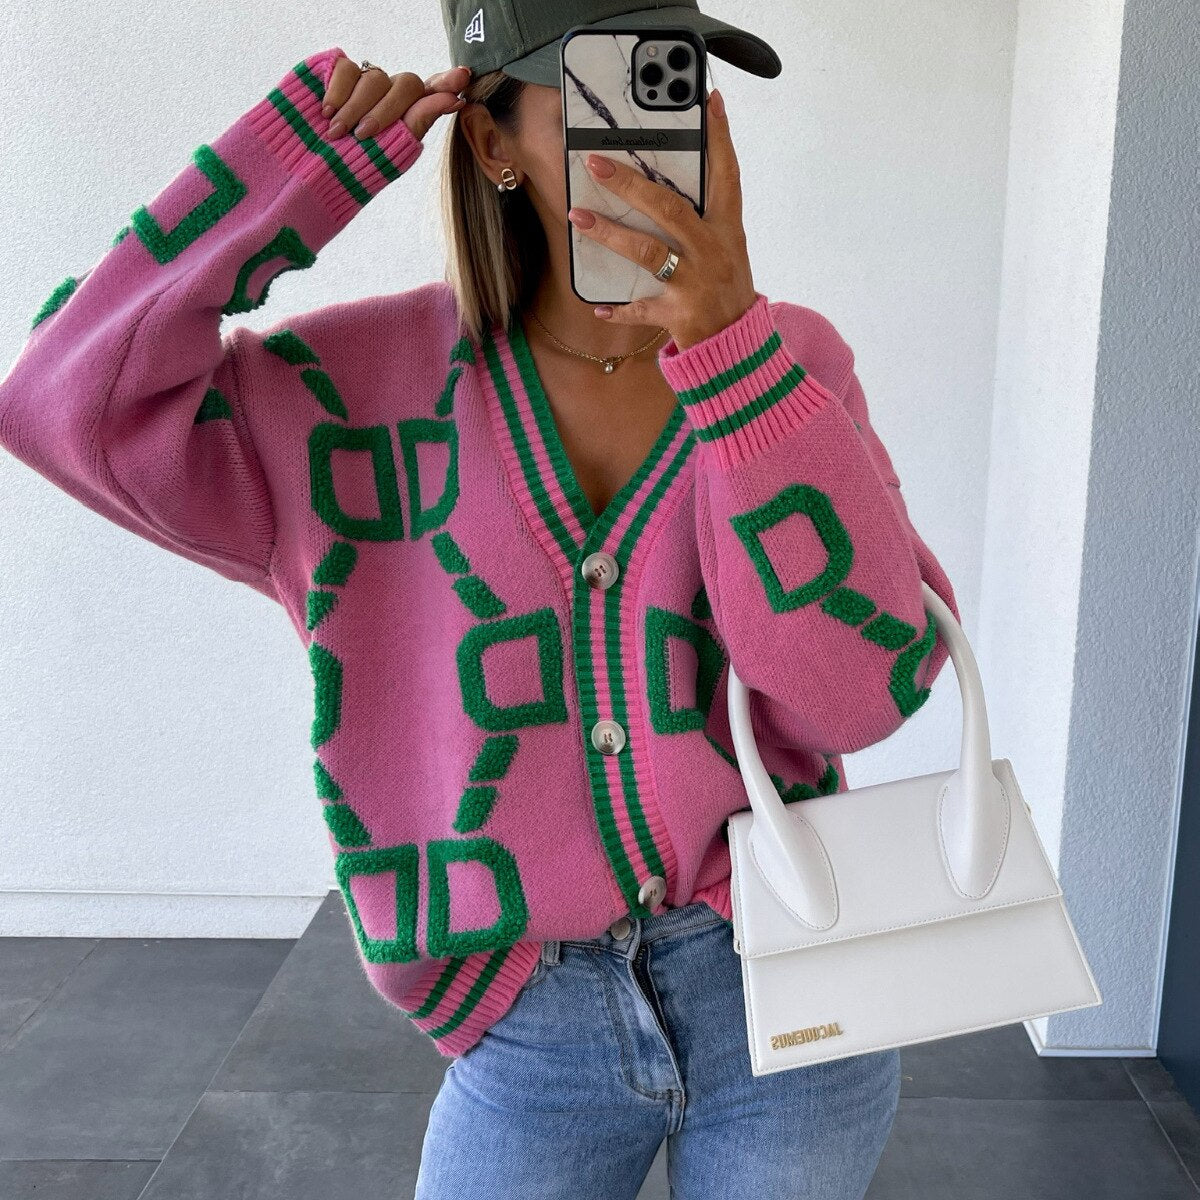 Billlnai Autumn Winter Knitted Button Up Loose Cardigan Sweater Women Long Sleeve Tops Oversized Sweaters Warm Sueters Coat